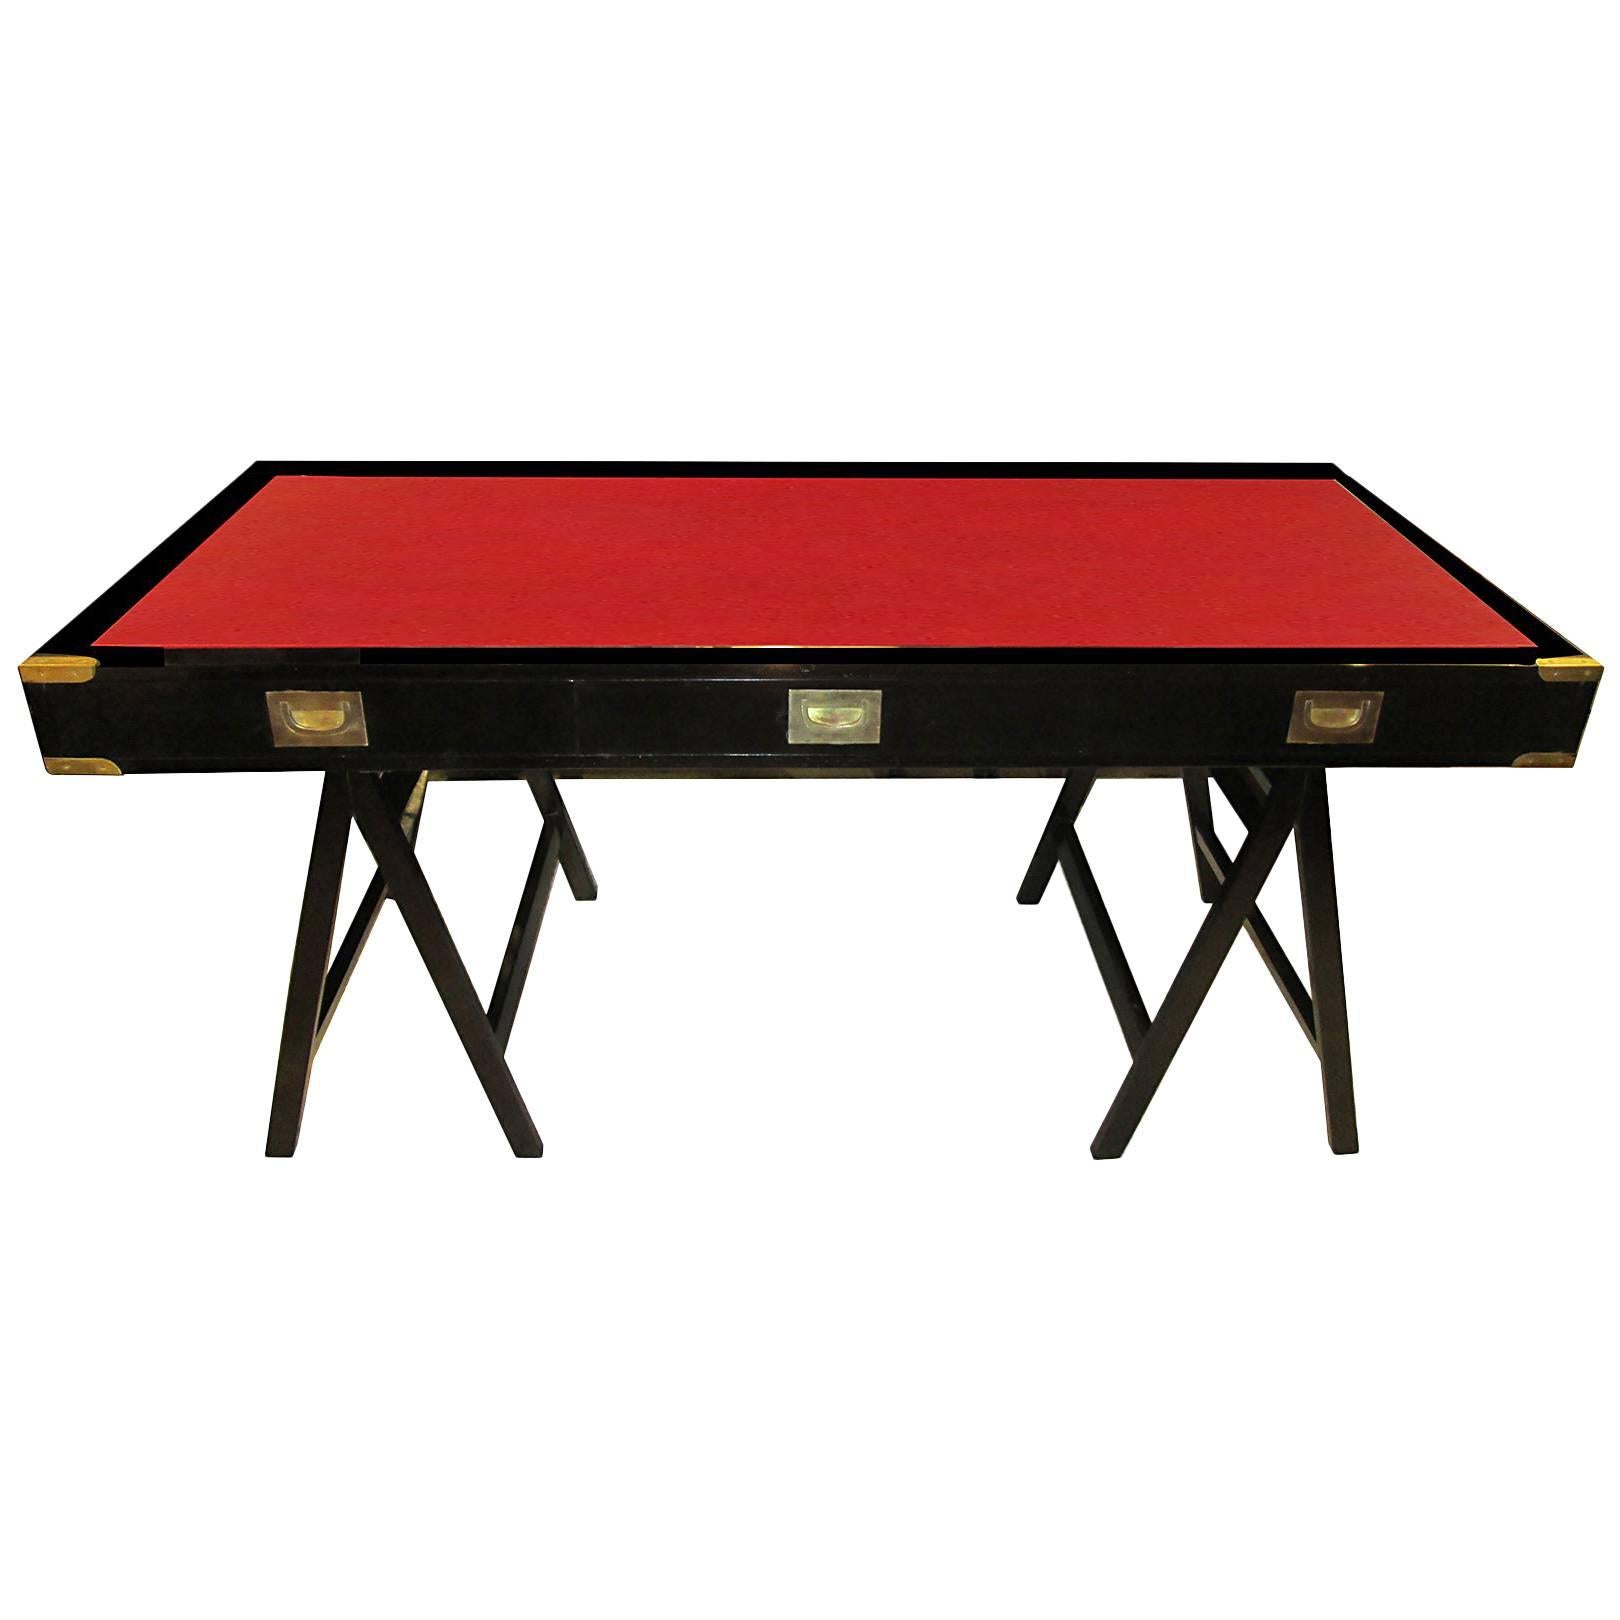 French midcentury ebonized campaign desk with red leather top.